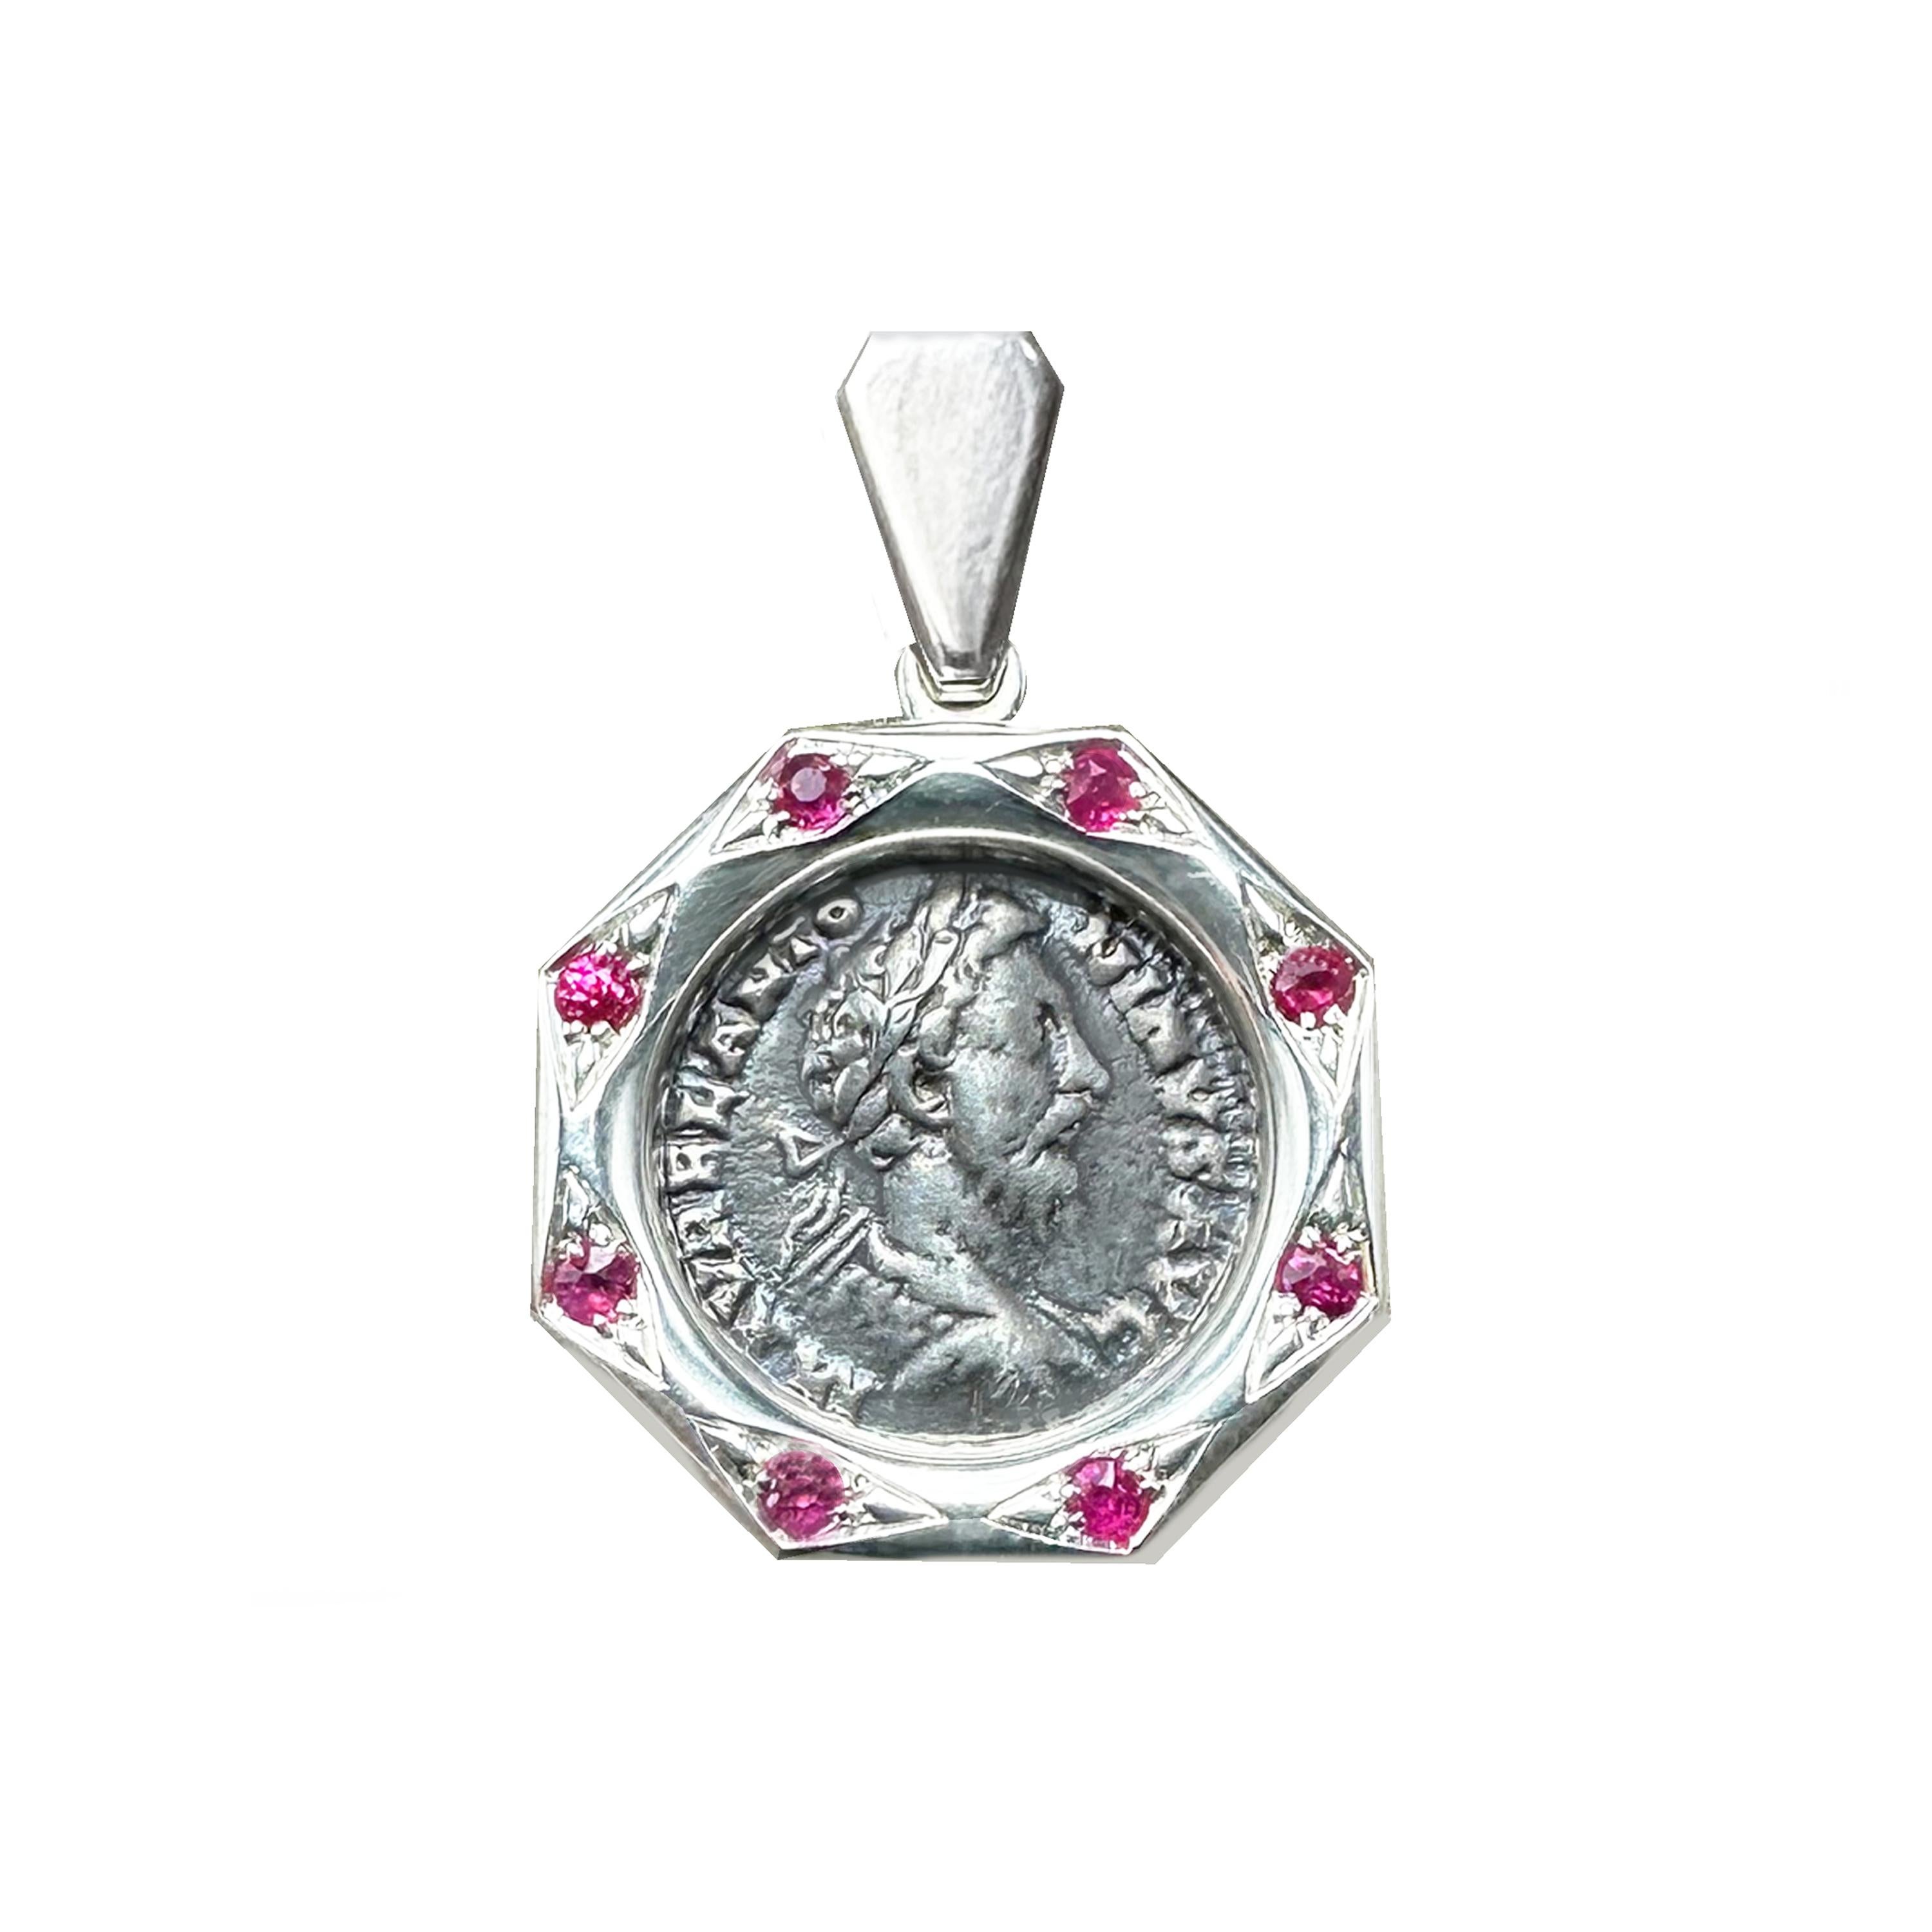 This sterling silver pendant holds an authentic Roman coin dating back to the 2nd century AD, depicting Emperor Marc'Aurelius, surrounded by 8 rubies. The reverse side showcases the seated Goddess Fortuna.

Marcus Aurelius, Emperor from 161 to 180